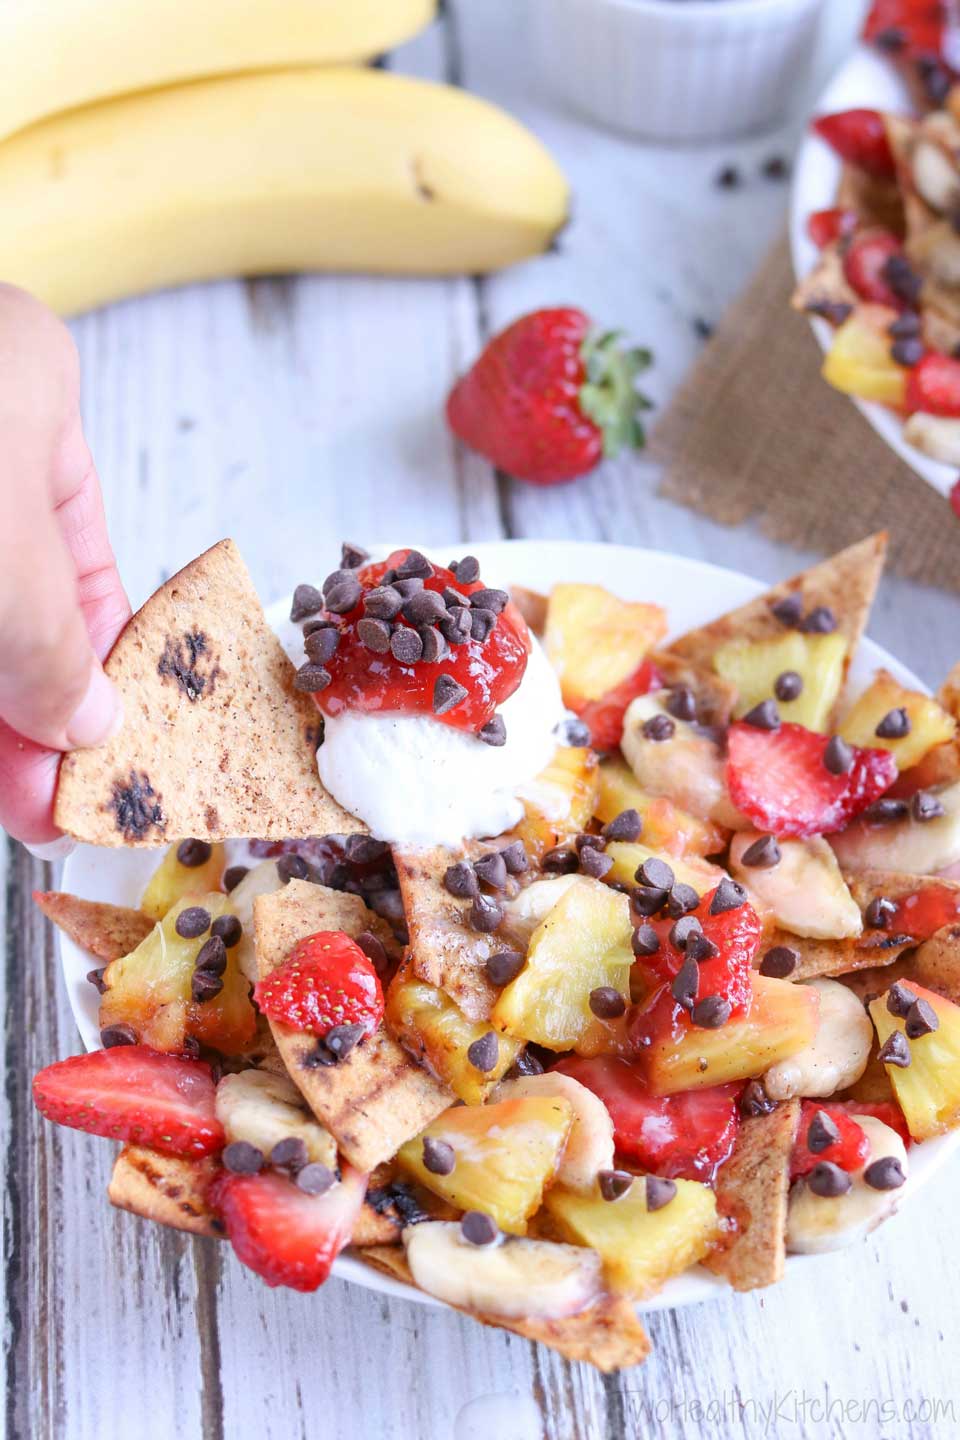 An easy, fun, and surprisingly healthy dessert! This unique dessert nachos recipe has all the flavors of a classic banana split! Crispy, sweetened "nacho chips," caramelized fruit, and a delicious strawberry sauce! Even better with a little scoop of ice cream! A simple yet decadent family favorite! {ad} | www.TwoHealthyKitchens.com